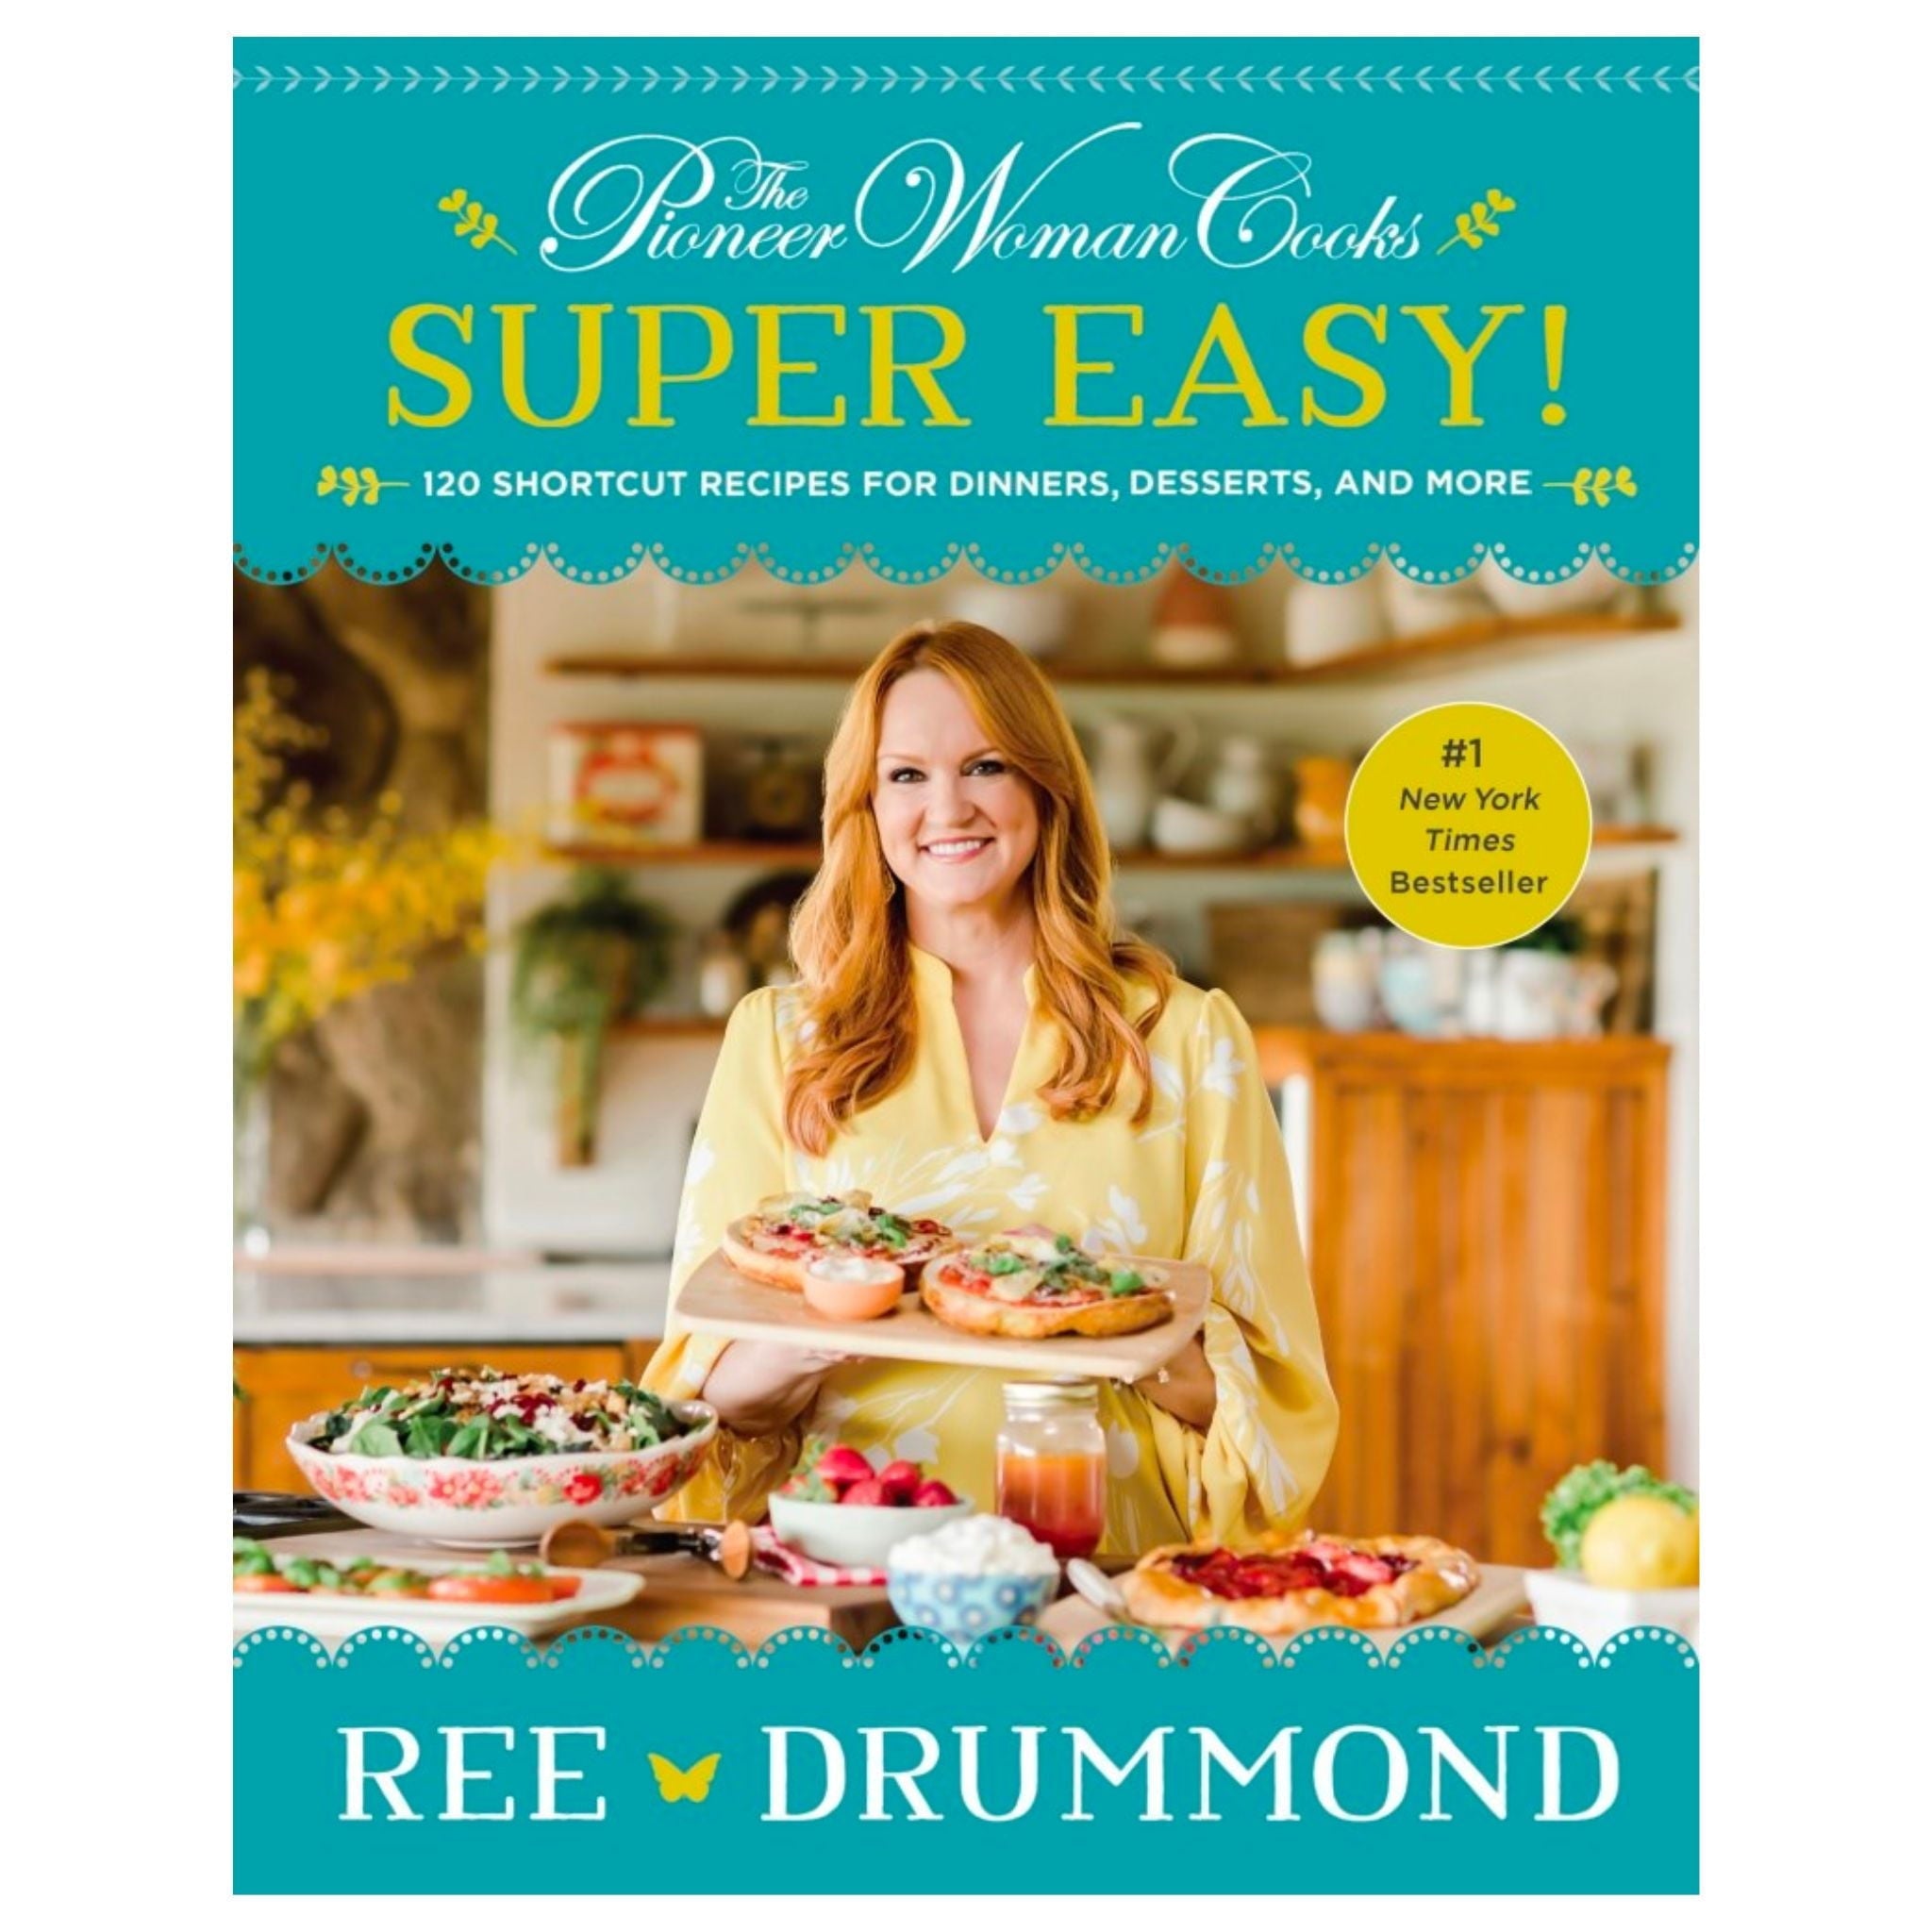 Katie Olson - The Pioneer Woman Cooks - Super Easy! 120 Shortcut Recipes for Dinners, Desserts